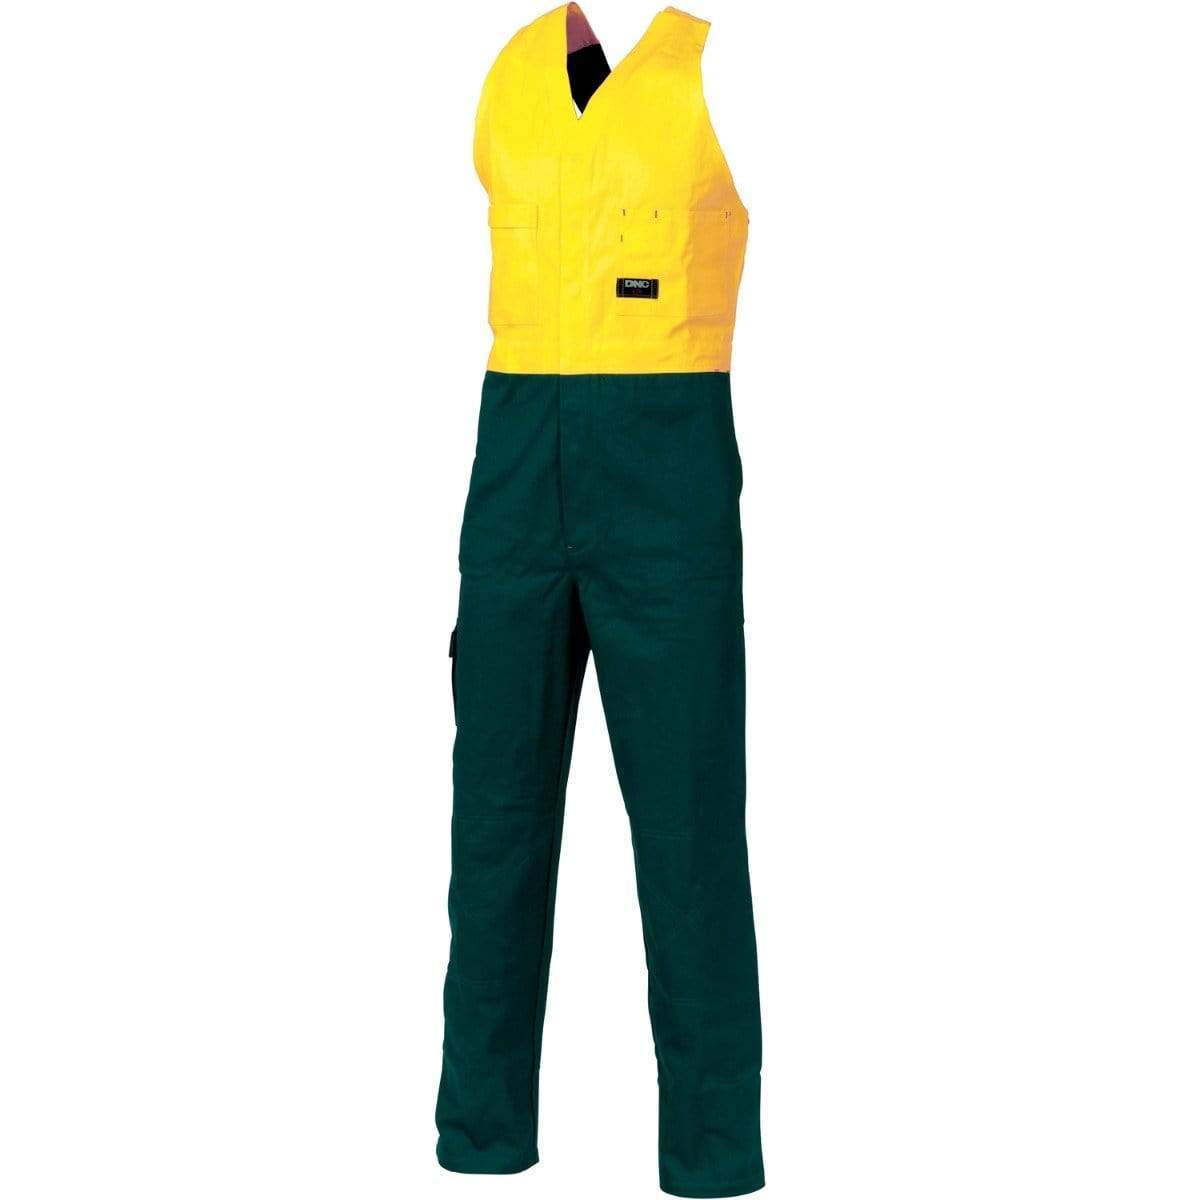 Dnc Workwear Hi-vis Two-tone Cotton Action Back Overall - 3853 Work Wear DNC Workwear Yellow/Bottle Green 77R 